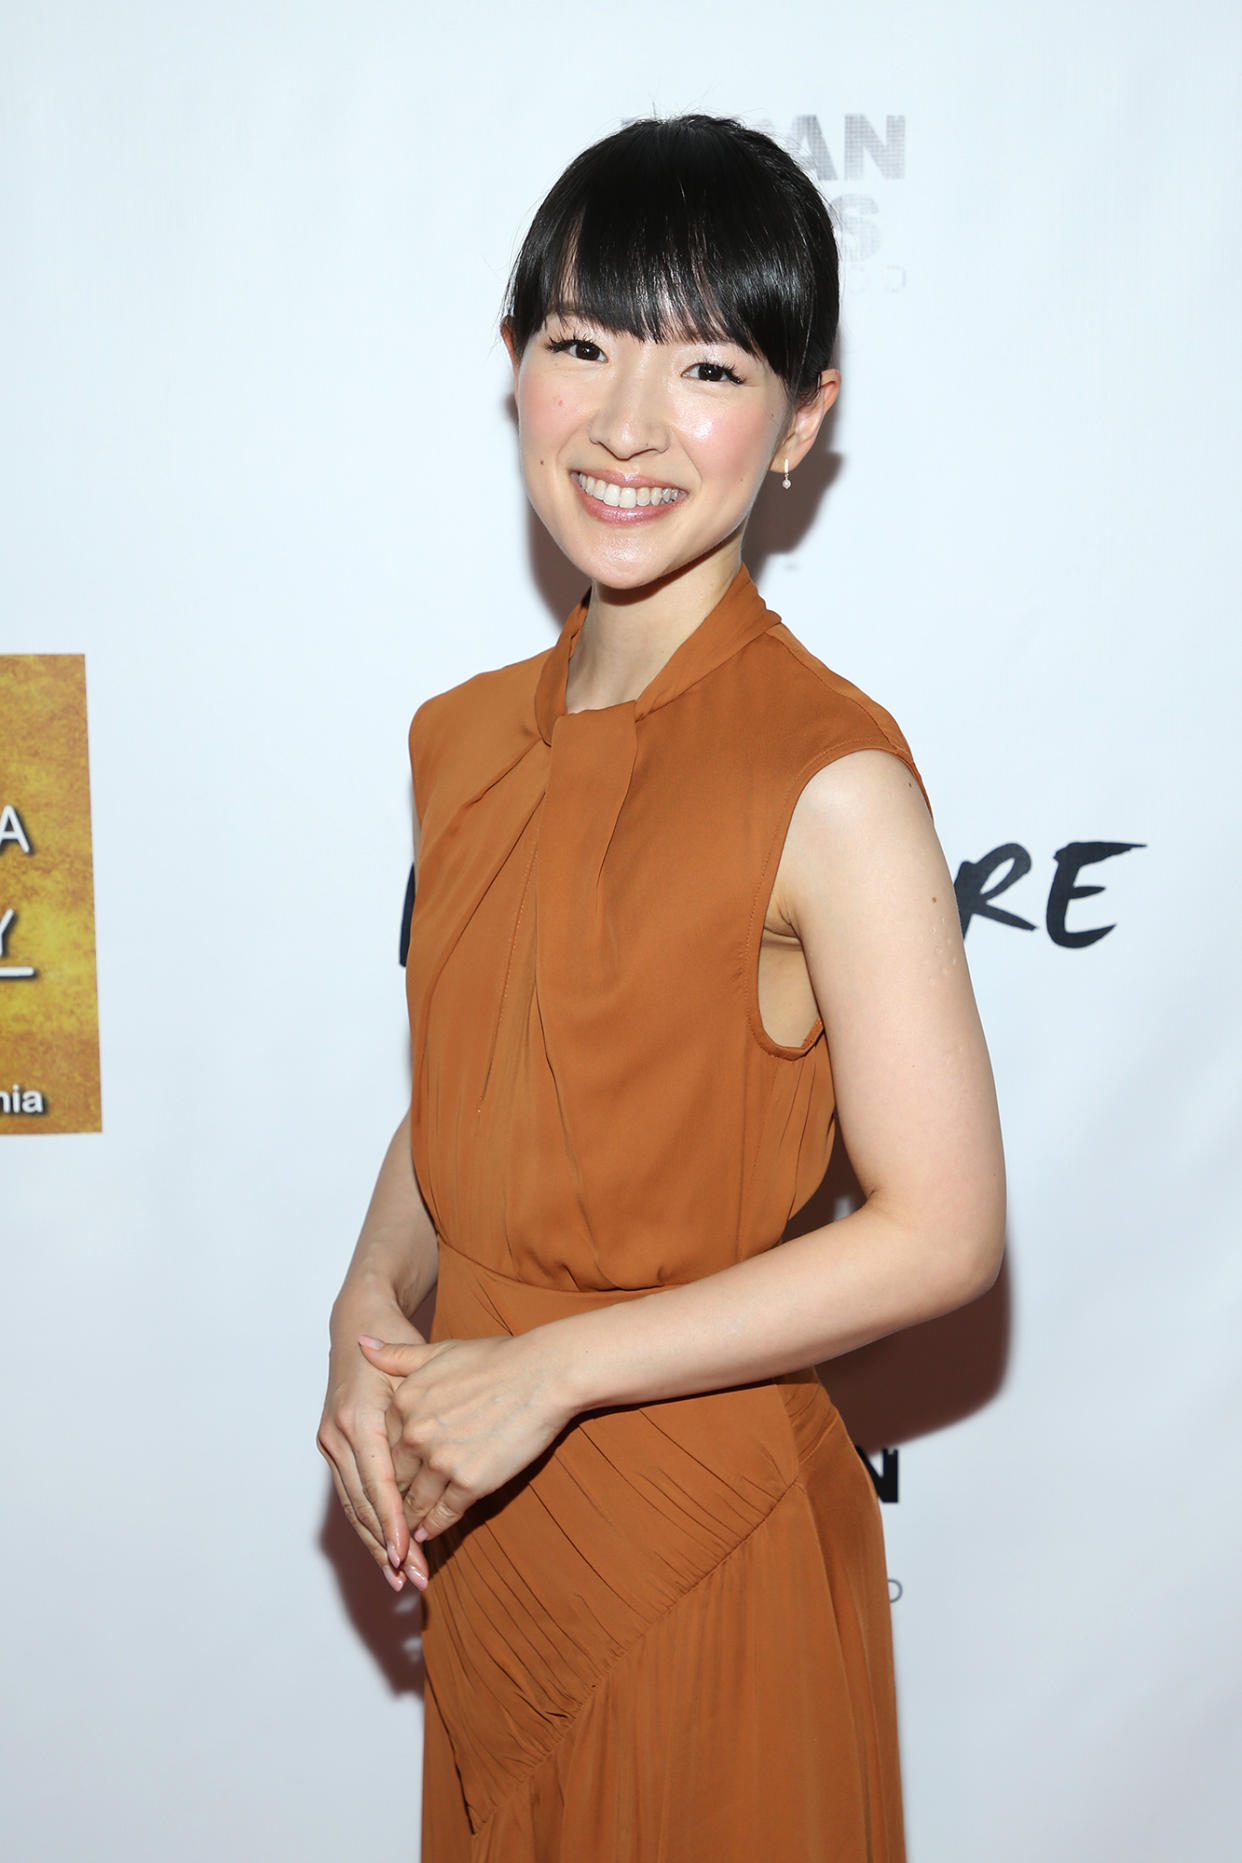 Marie Kondo at the Japan America Society of Southern California's 110th Anniversary Dinner and Gala at Angel Stadium on July 11, 2019.